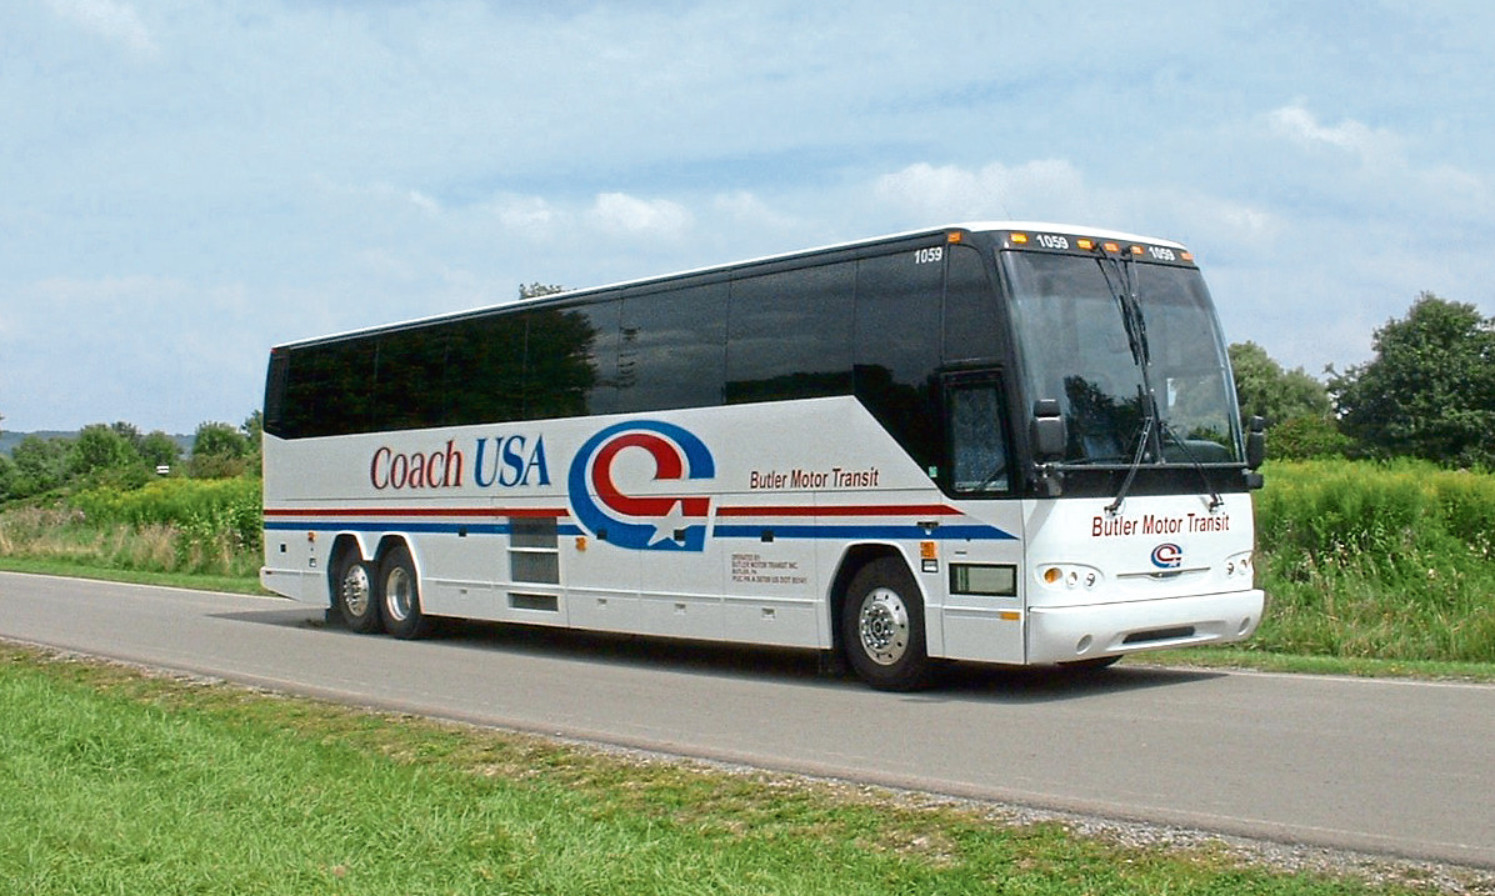 A Stageacoach Coach USA vehicle hits the open road.